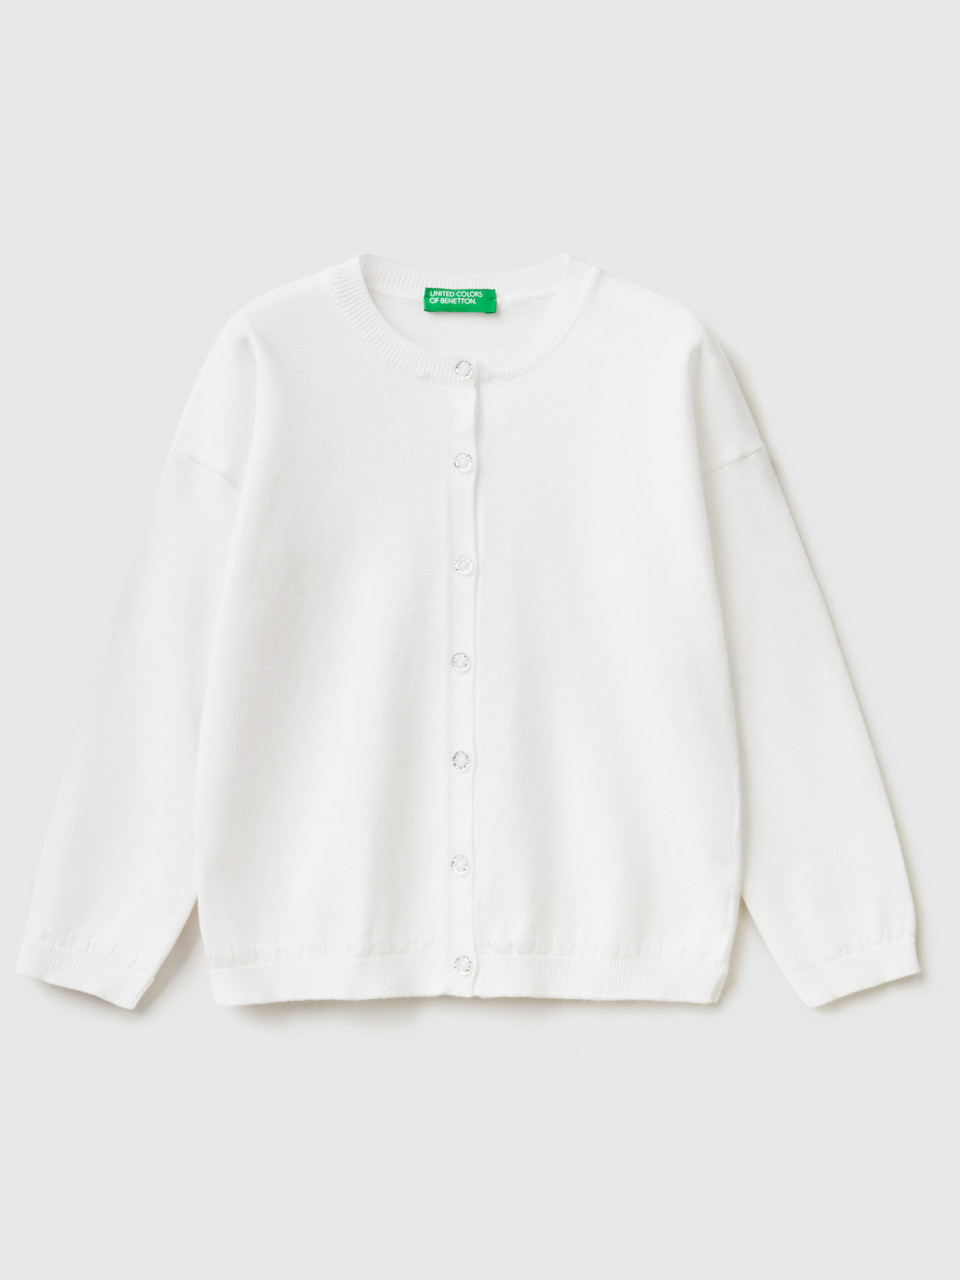 Benetton, Cardigan With Glittery Buttons, White, Kids